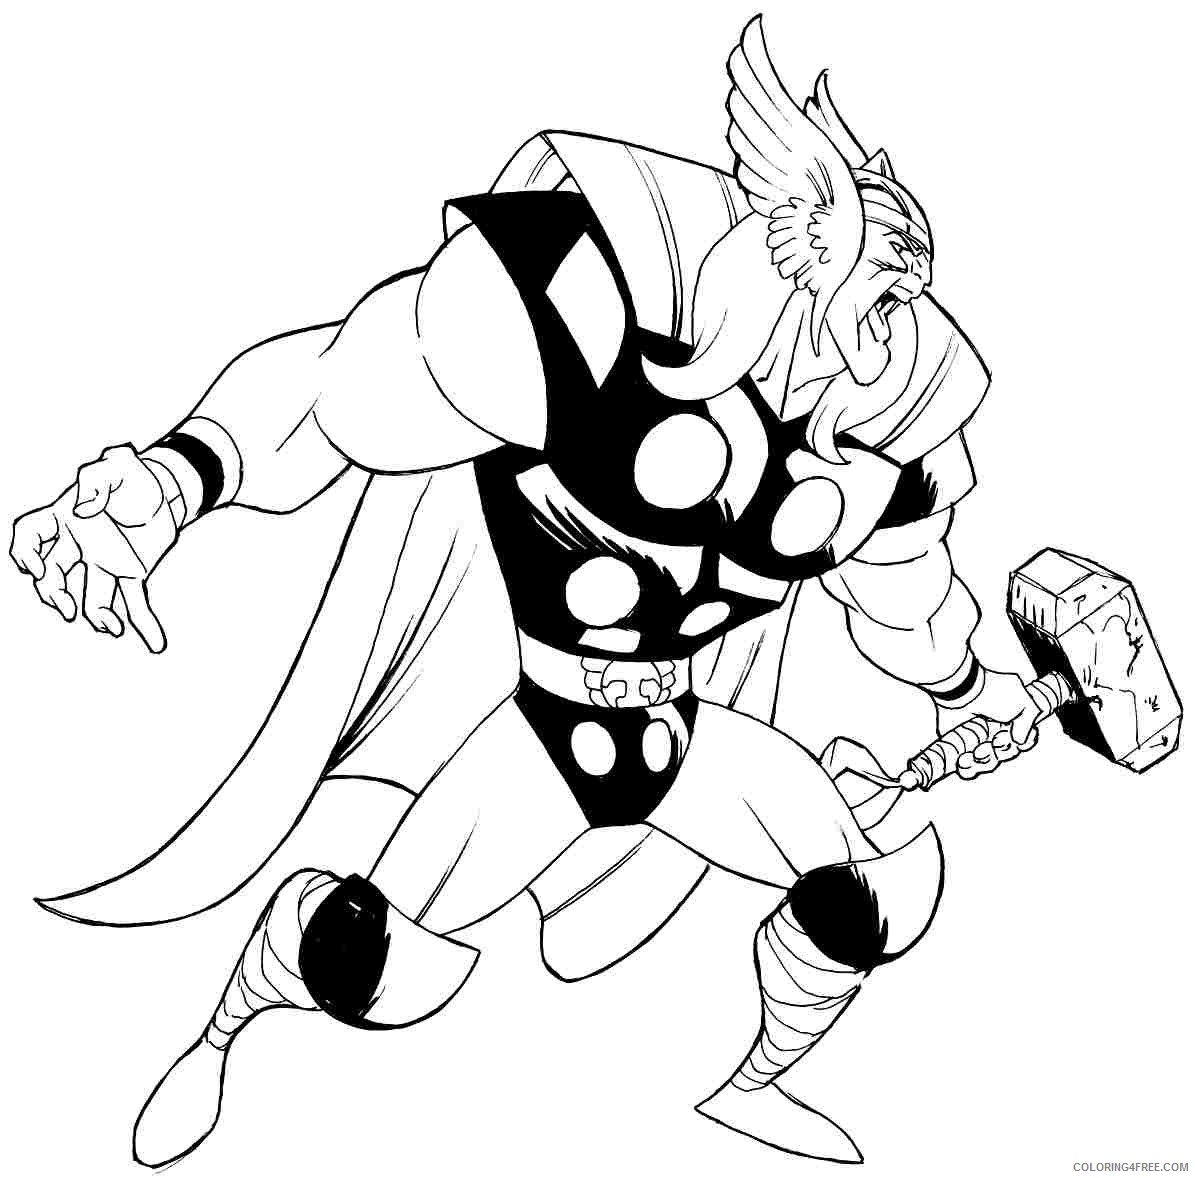 thor coloring pages cartoon Coloring4free